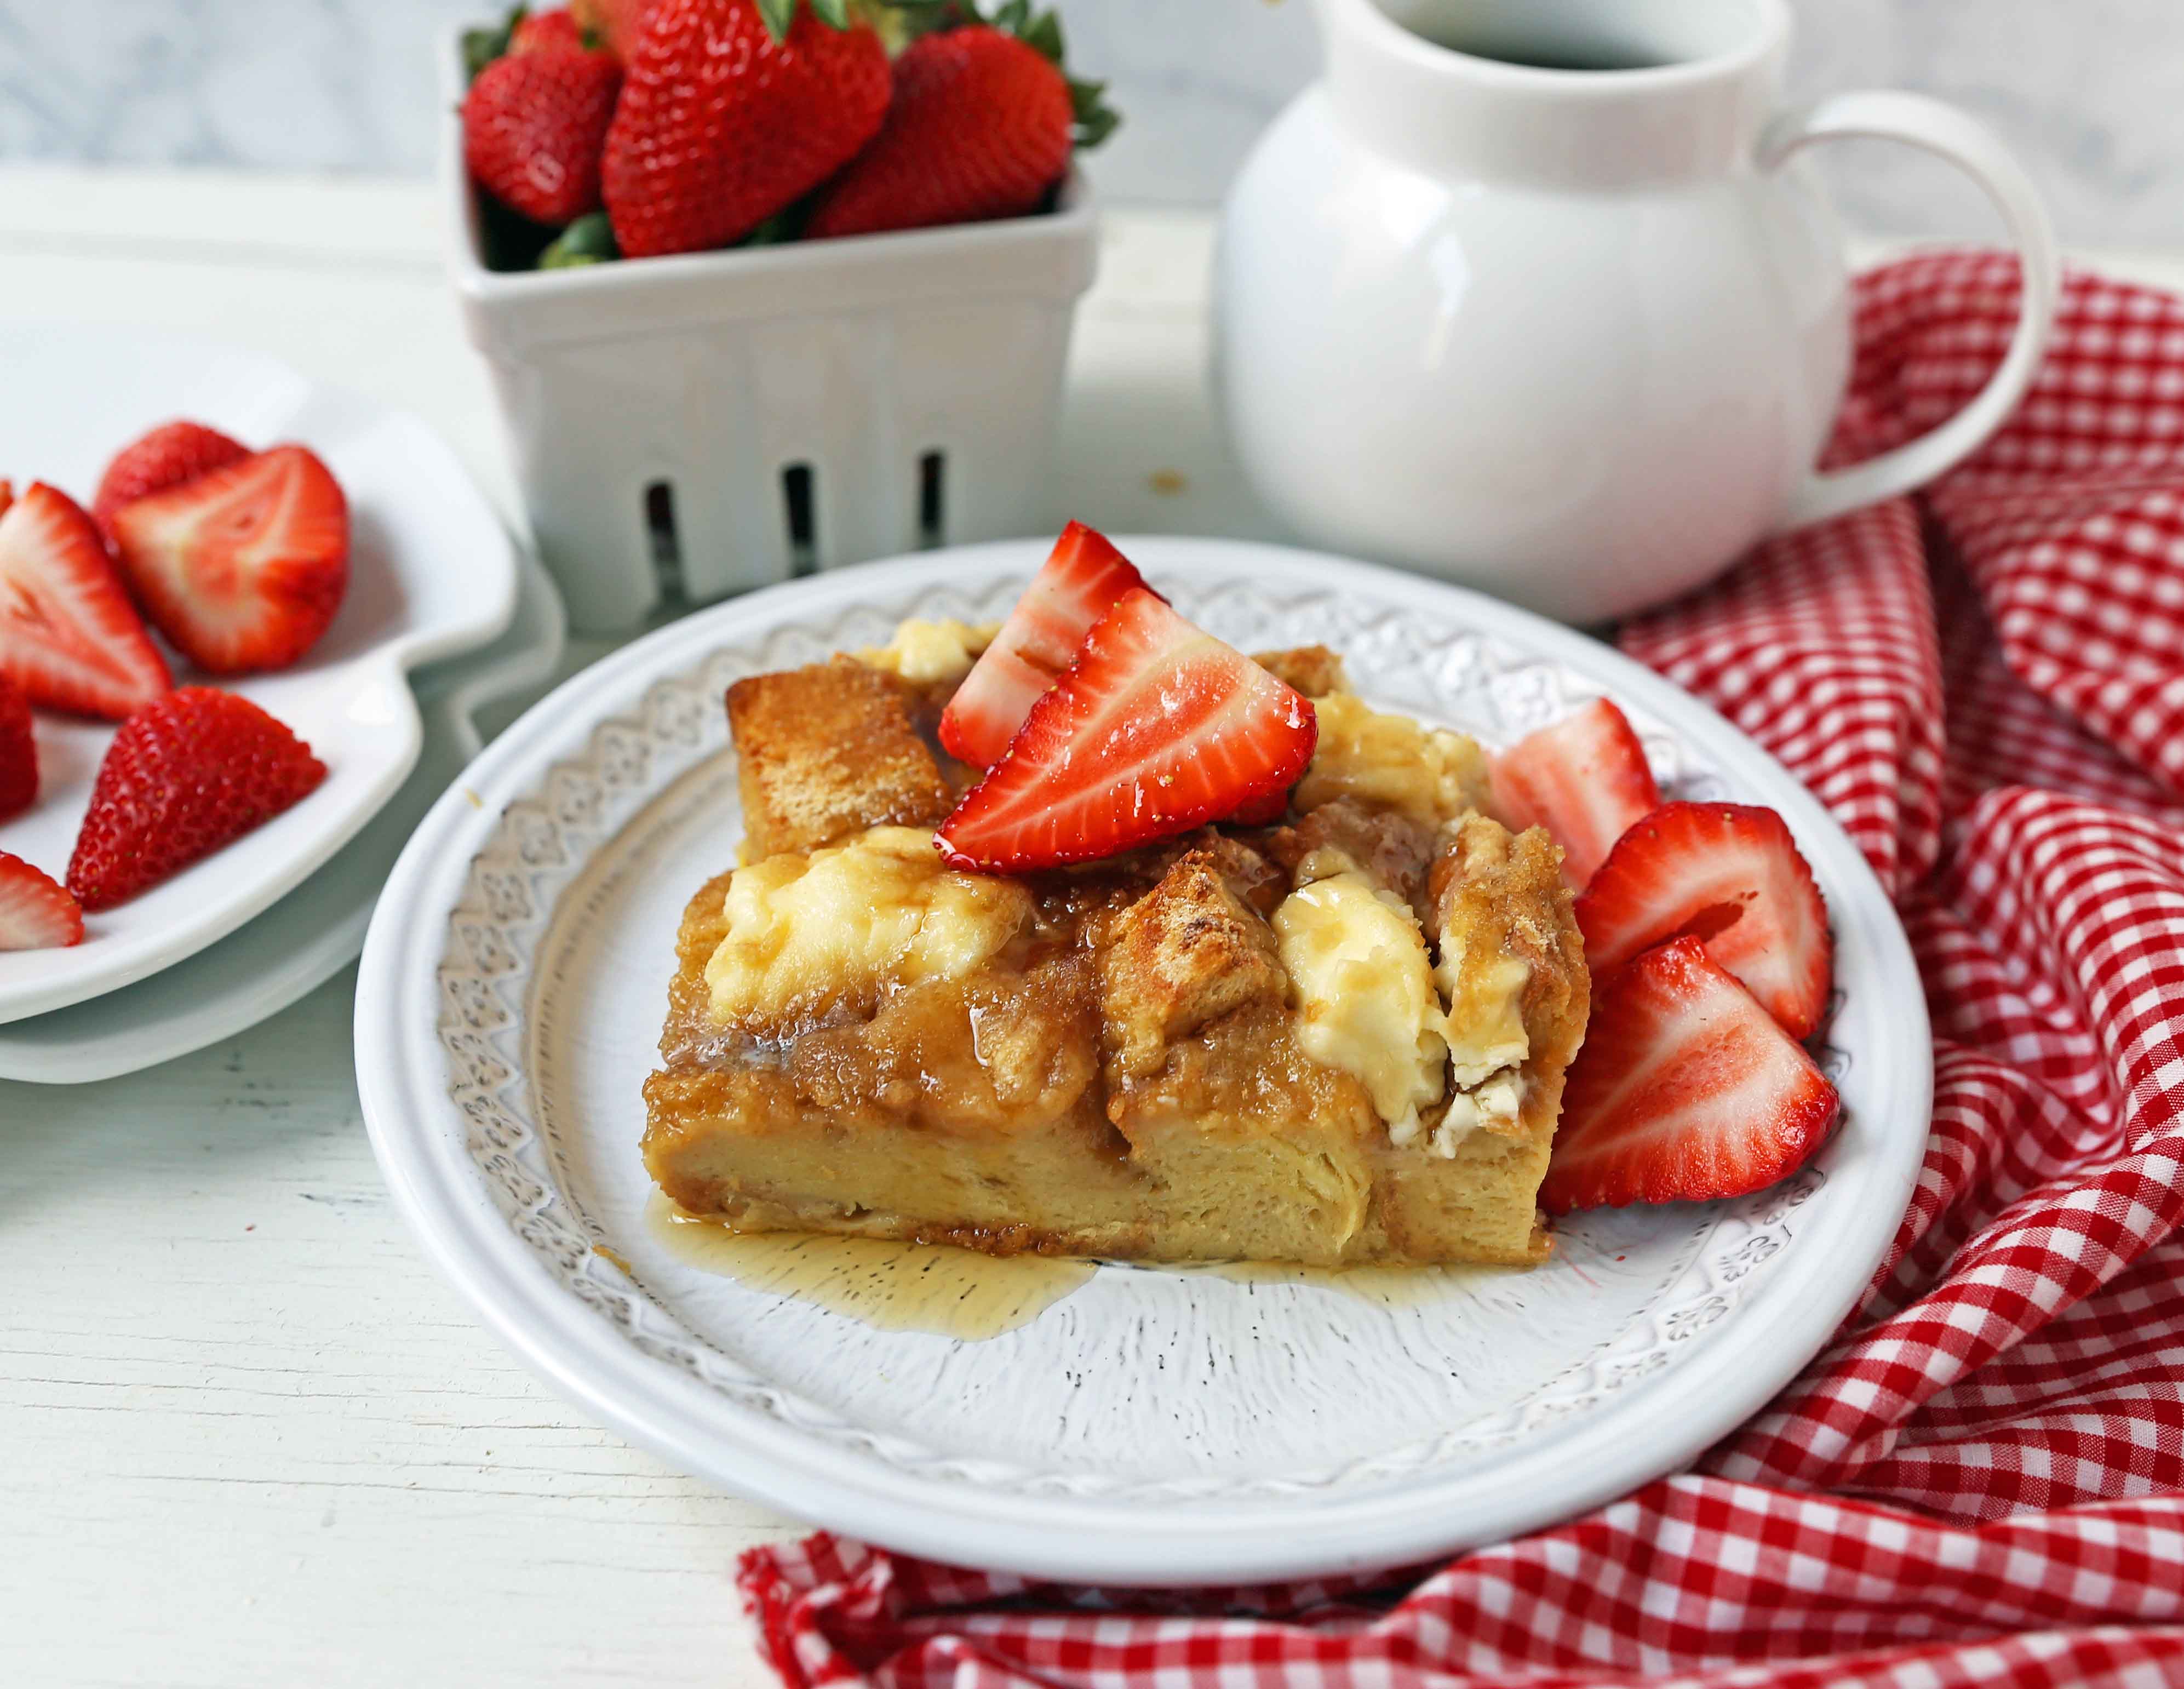 Baked French Toast Casserole. Challah bread soaked in a rich sweet custard with sweet cream cheese and topped with a brown sugar streusel topping. An easy overnight french toast recipe. www.modernhoney.com #frenchtoast #bakedfrenchtoast #breakfast #overnightfrenchtoast